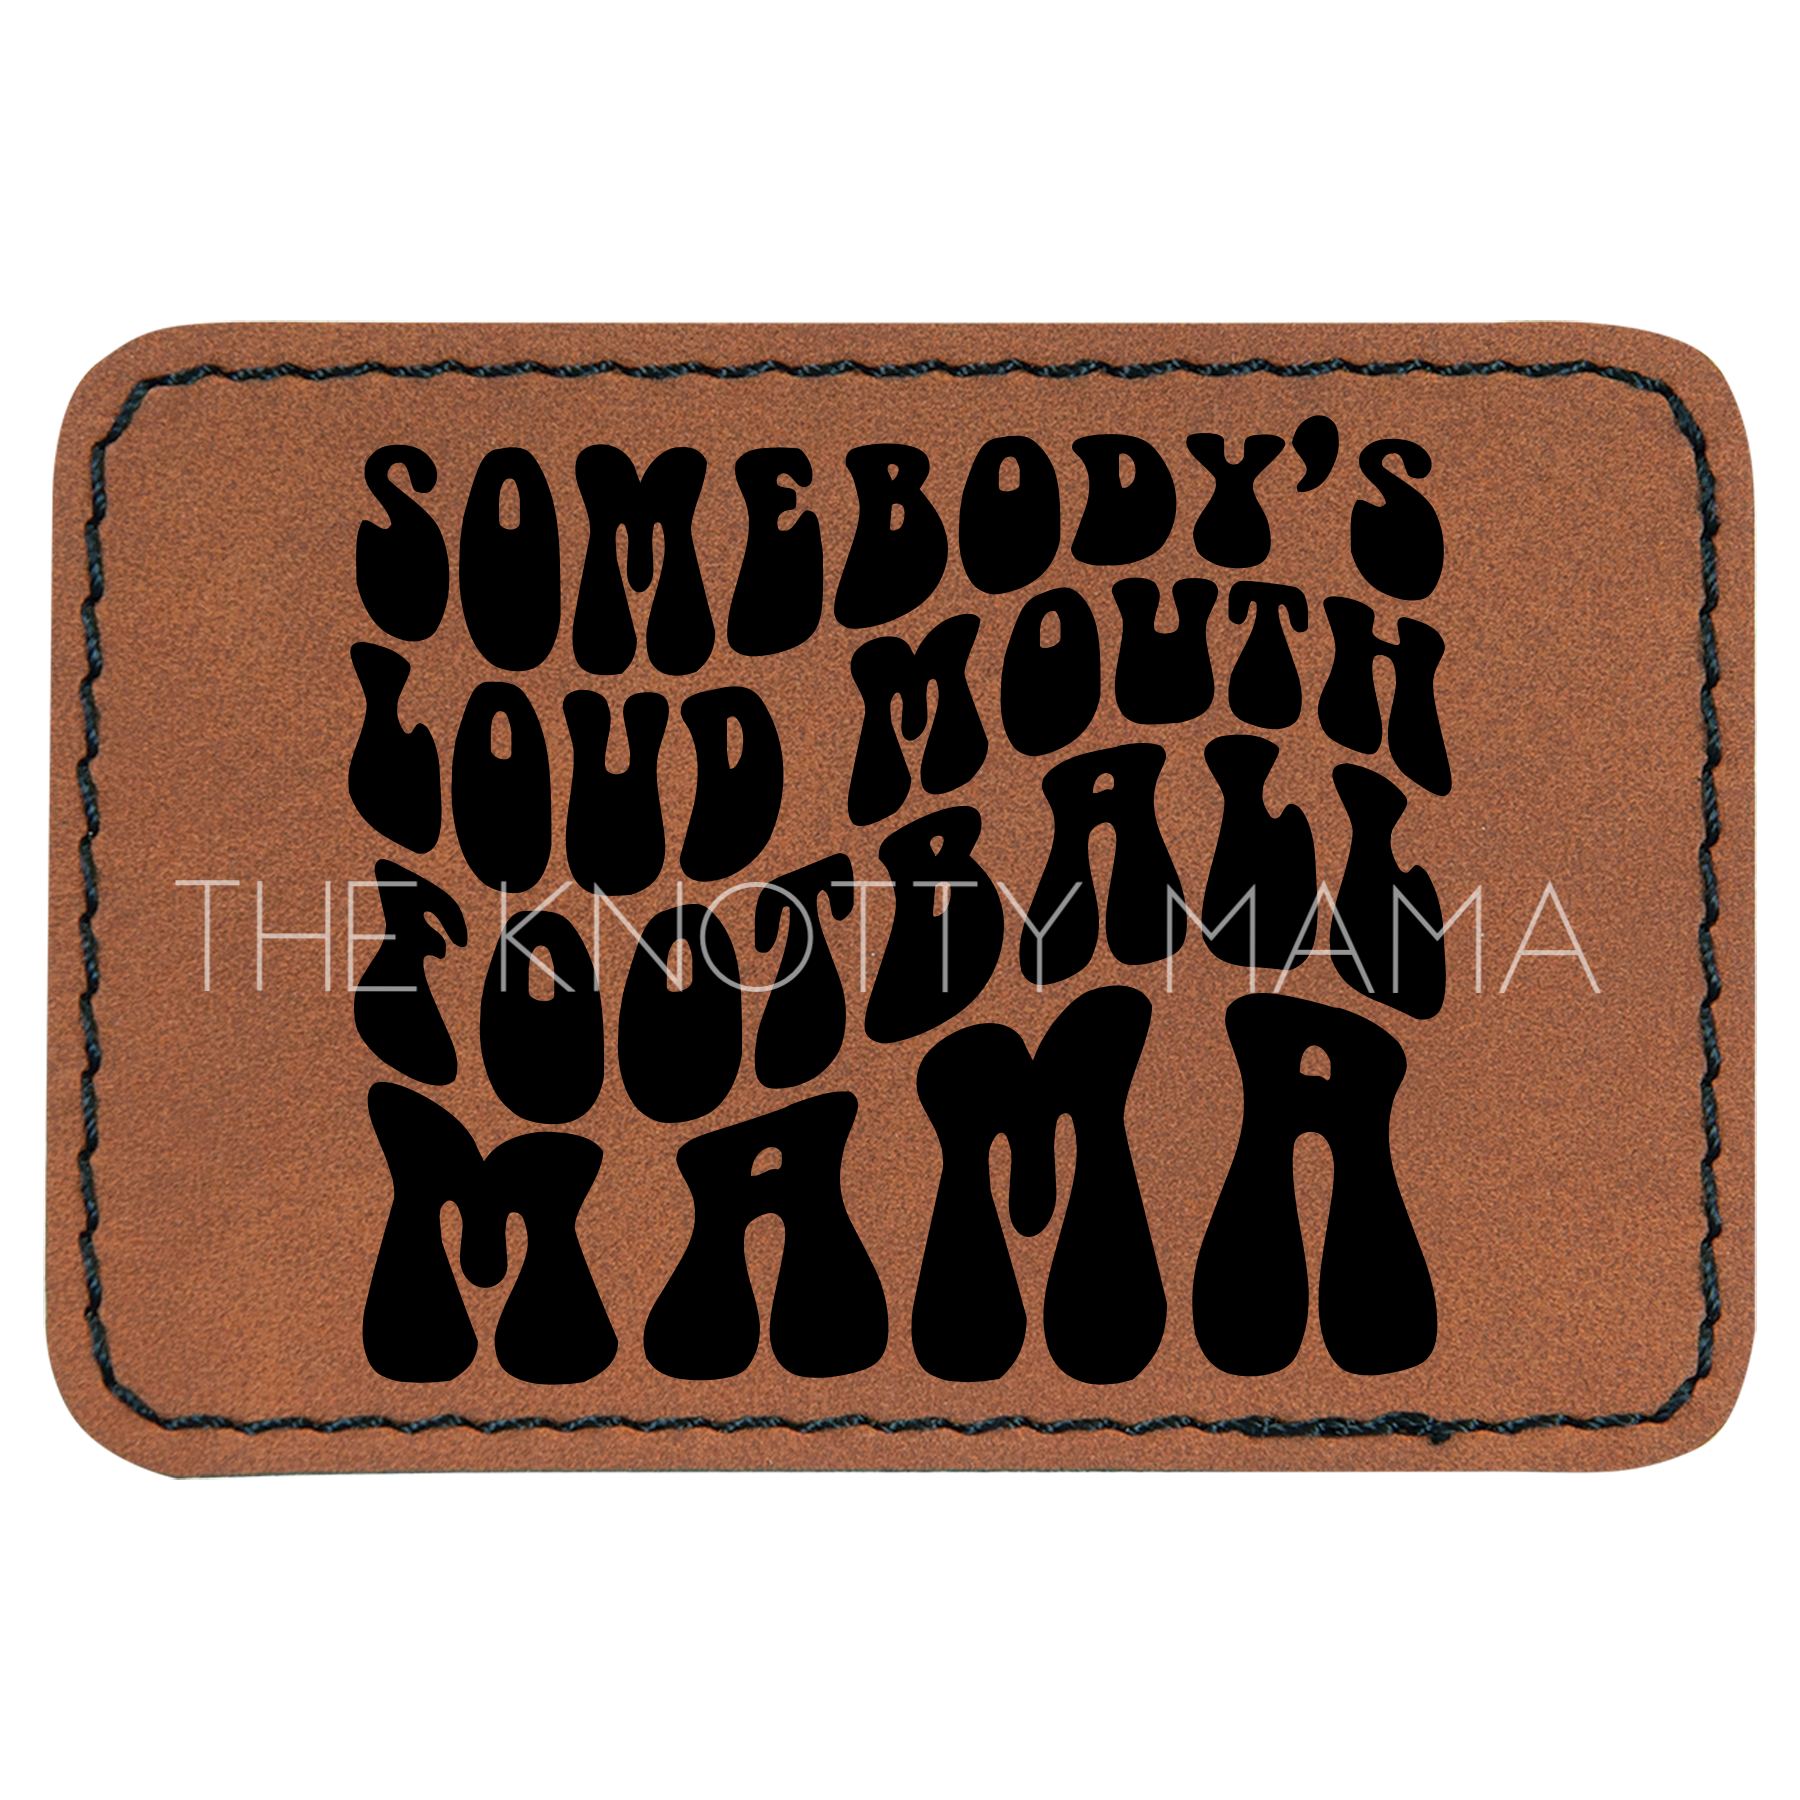 Somebody's Loud Mouth Football Mama Patch